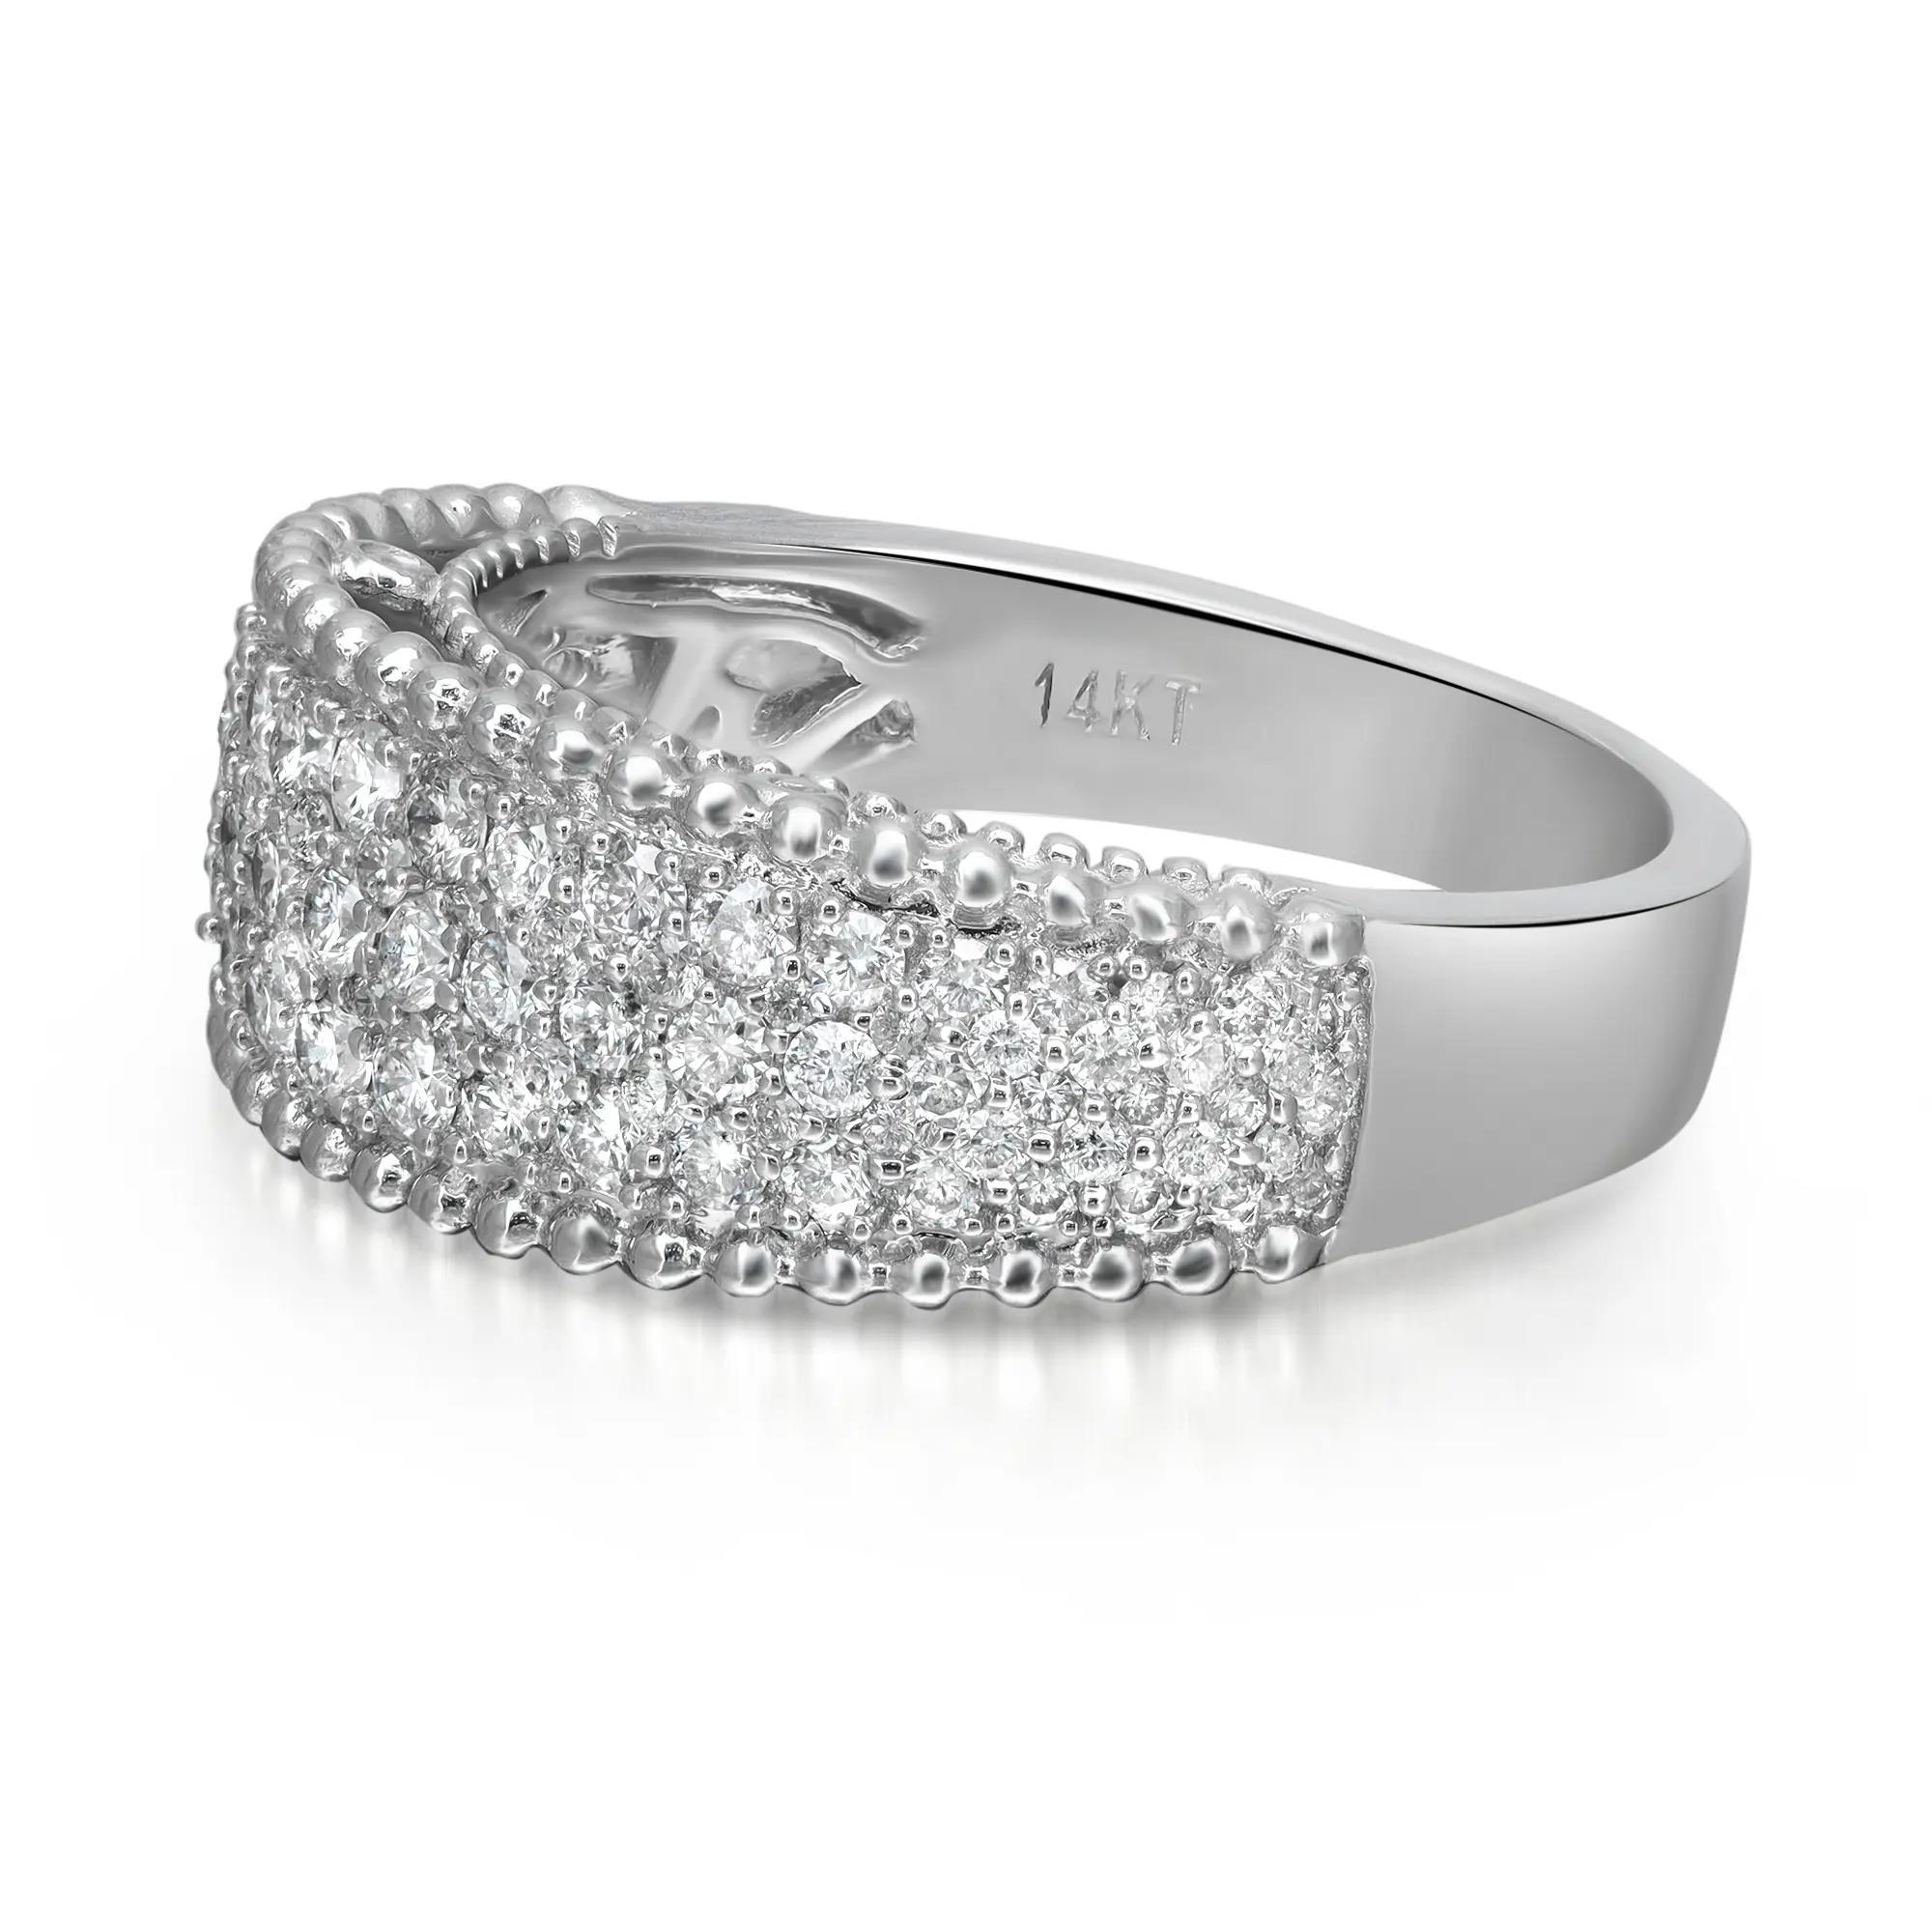 Modern Pave Diamond Ring Round Cut 14K White Gold 1.00 Cttw For Sale